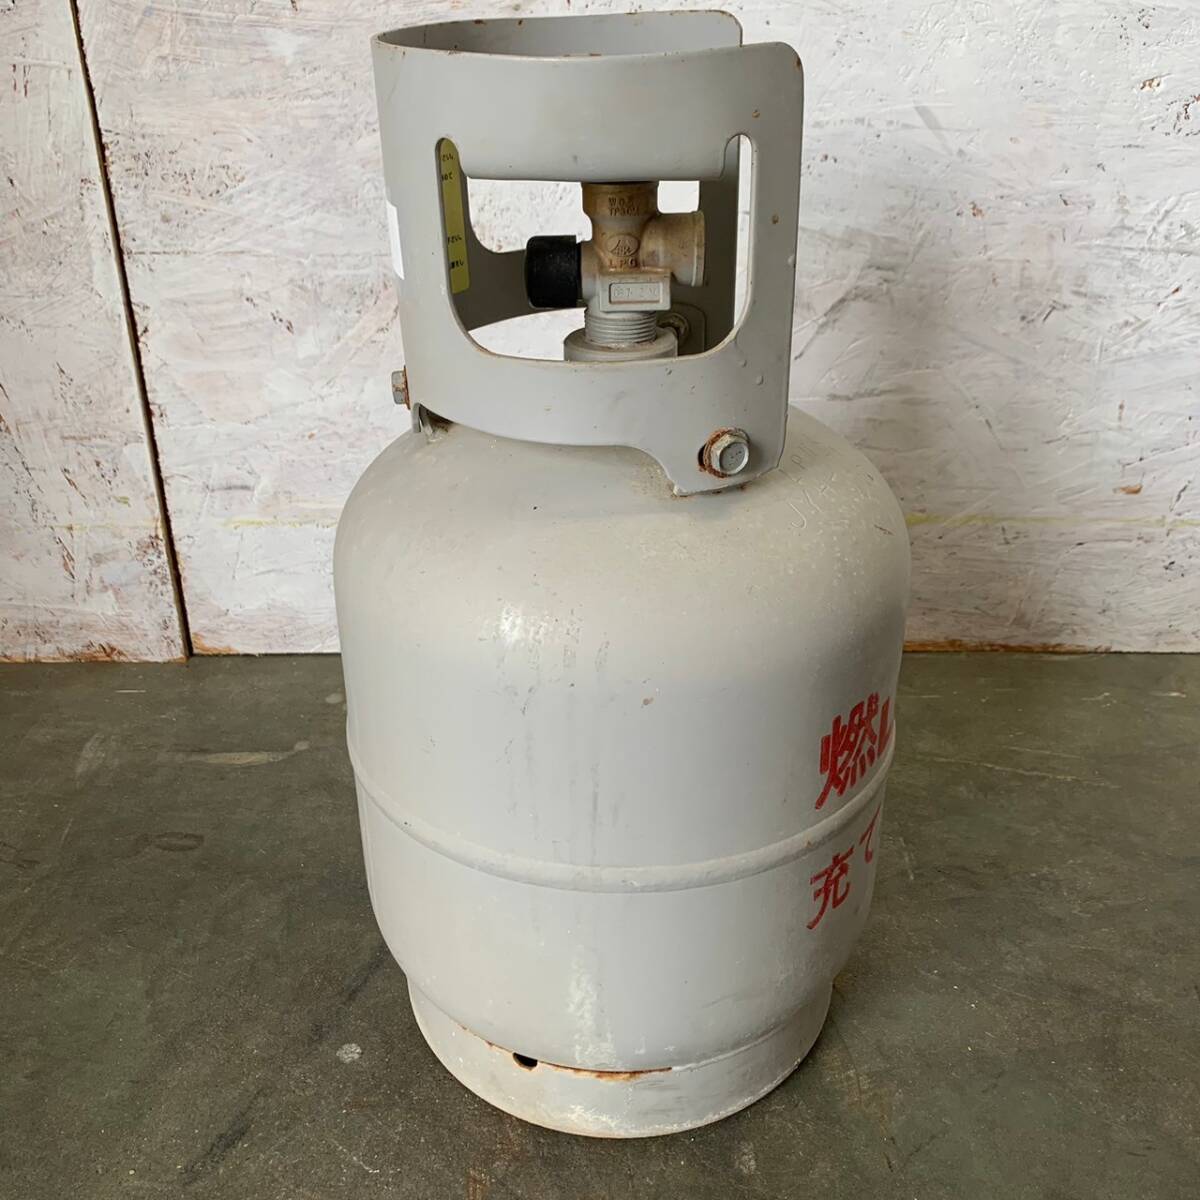 LP gas propane gas compressed gas cylinder container empty 10kg filling expiration of a term camp barbecue BBQ portable cooking stove waste oil stove made processing cart S0012